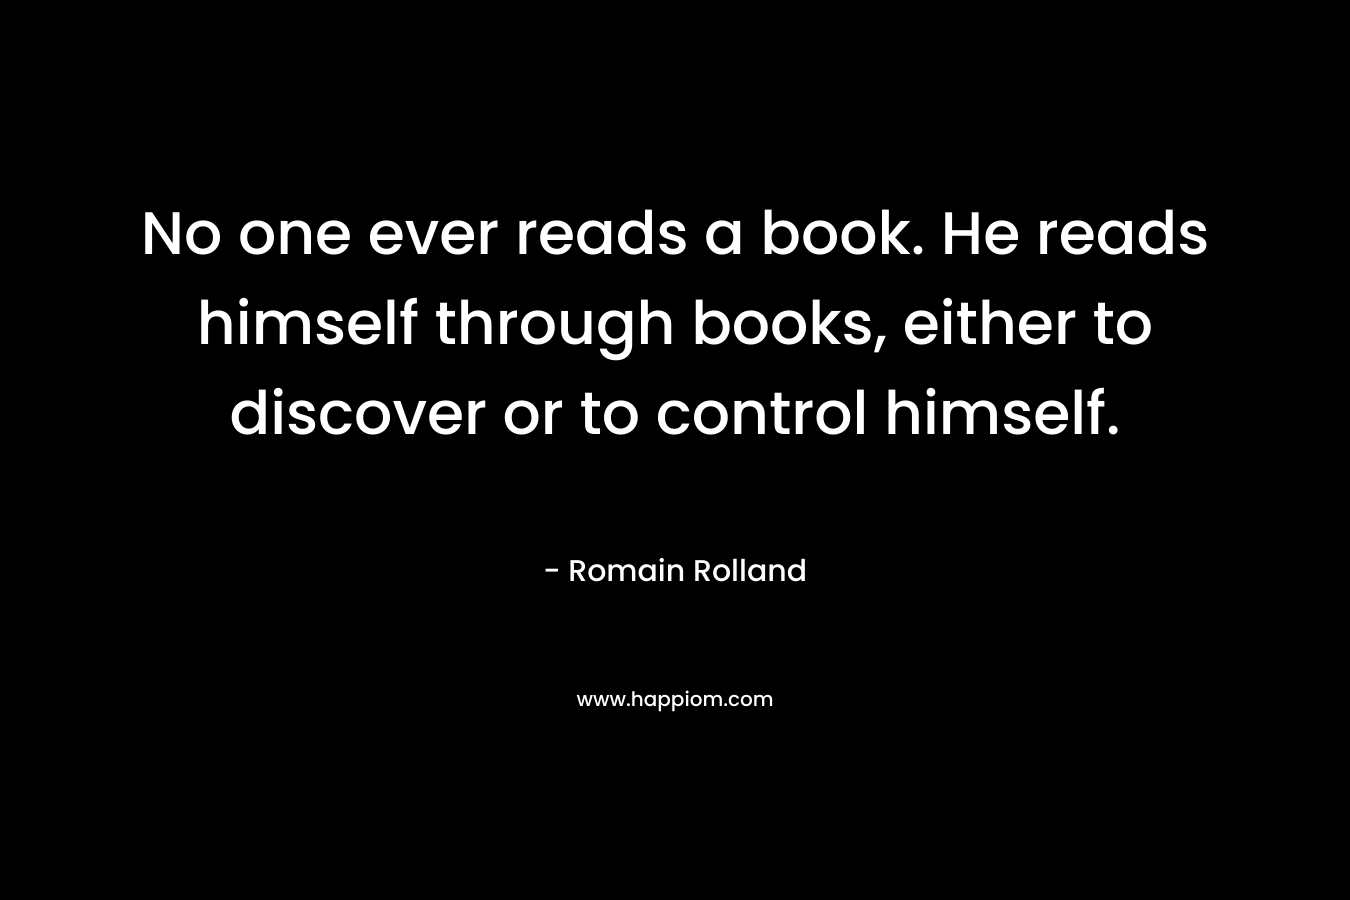 No one ever reads a book. He reads himself through books, either to discover or to control himself.